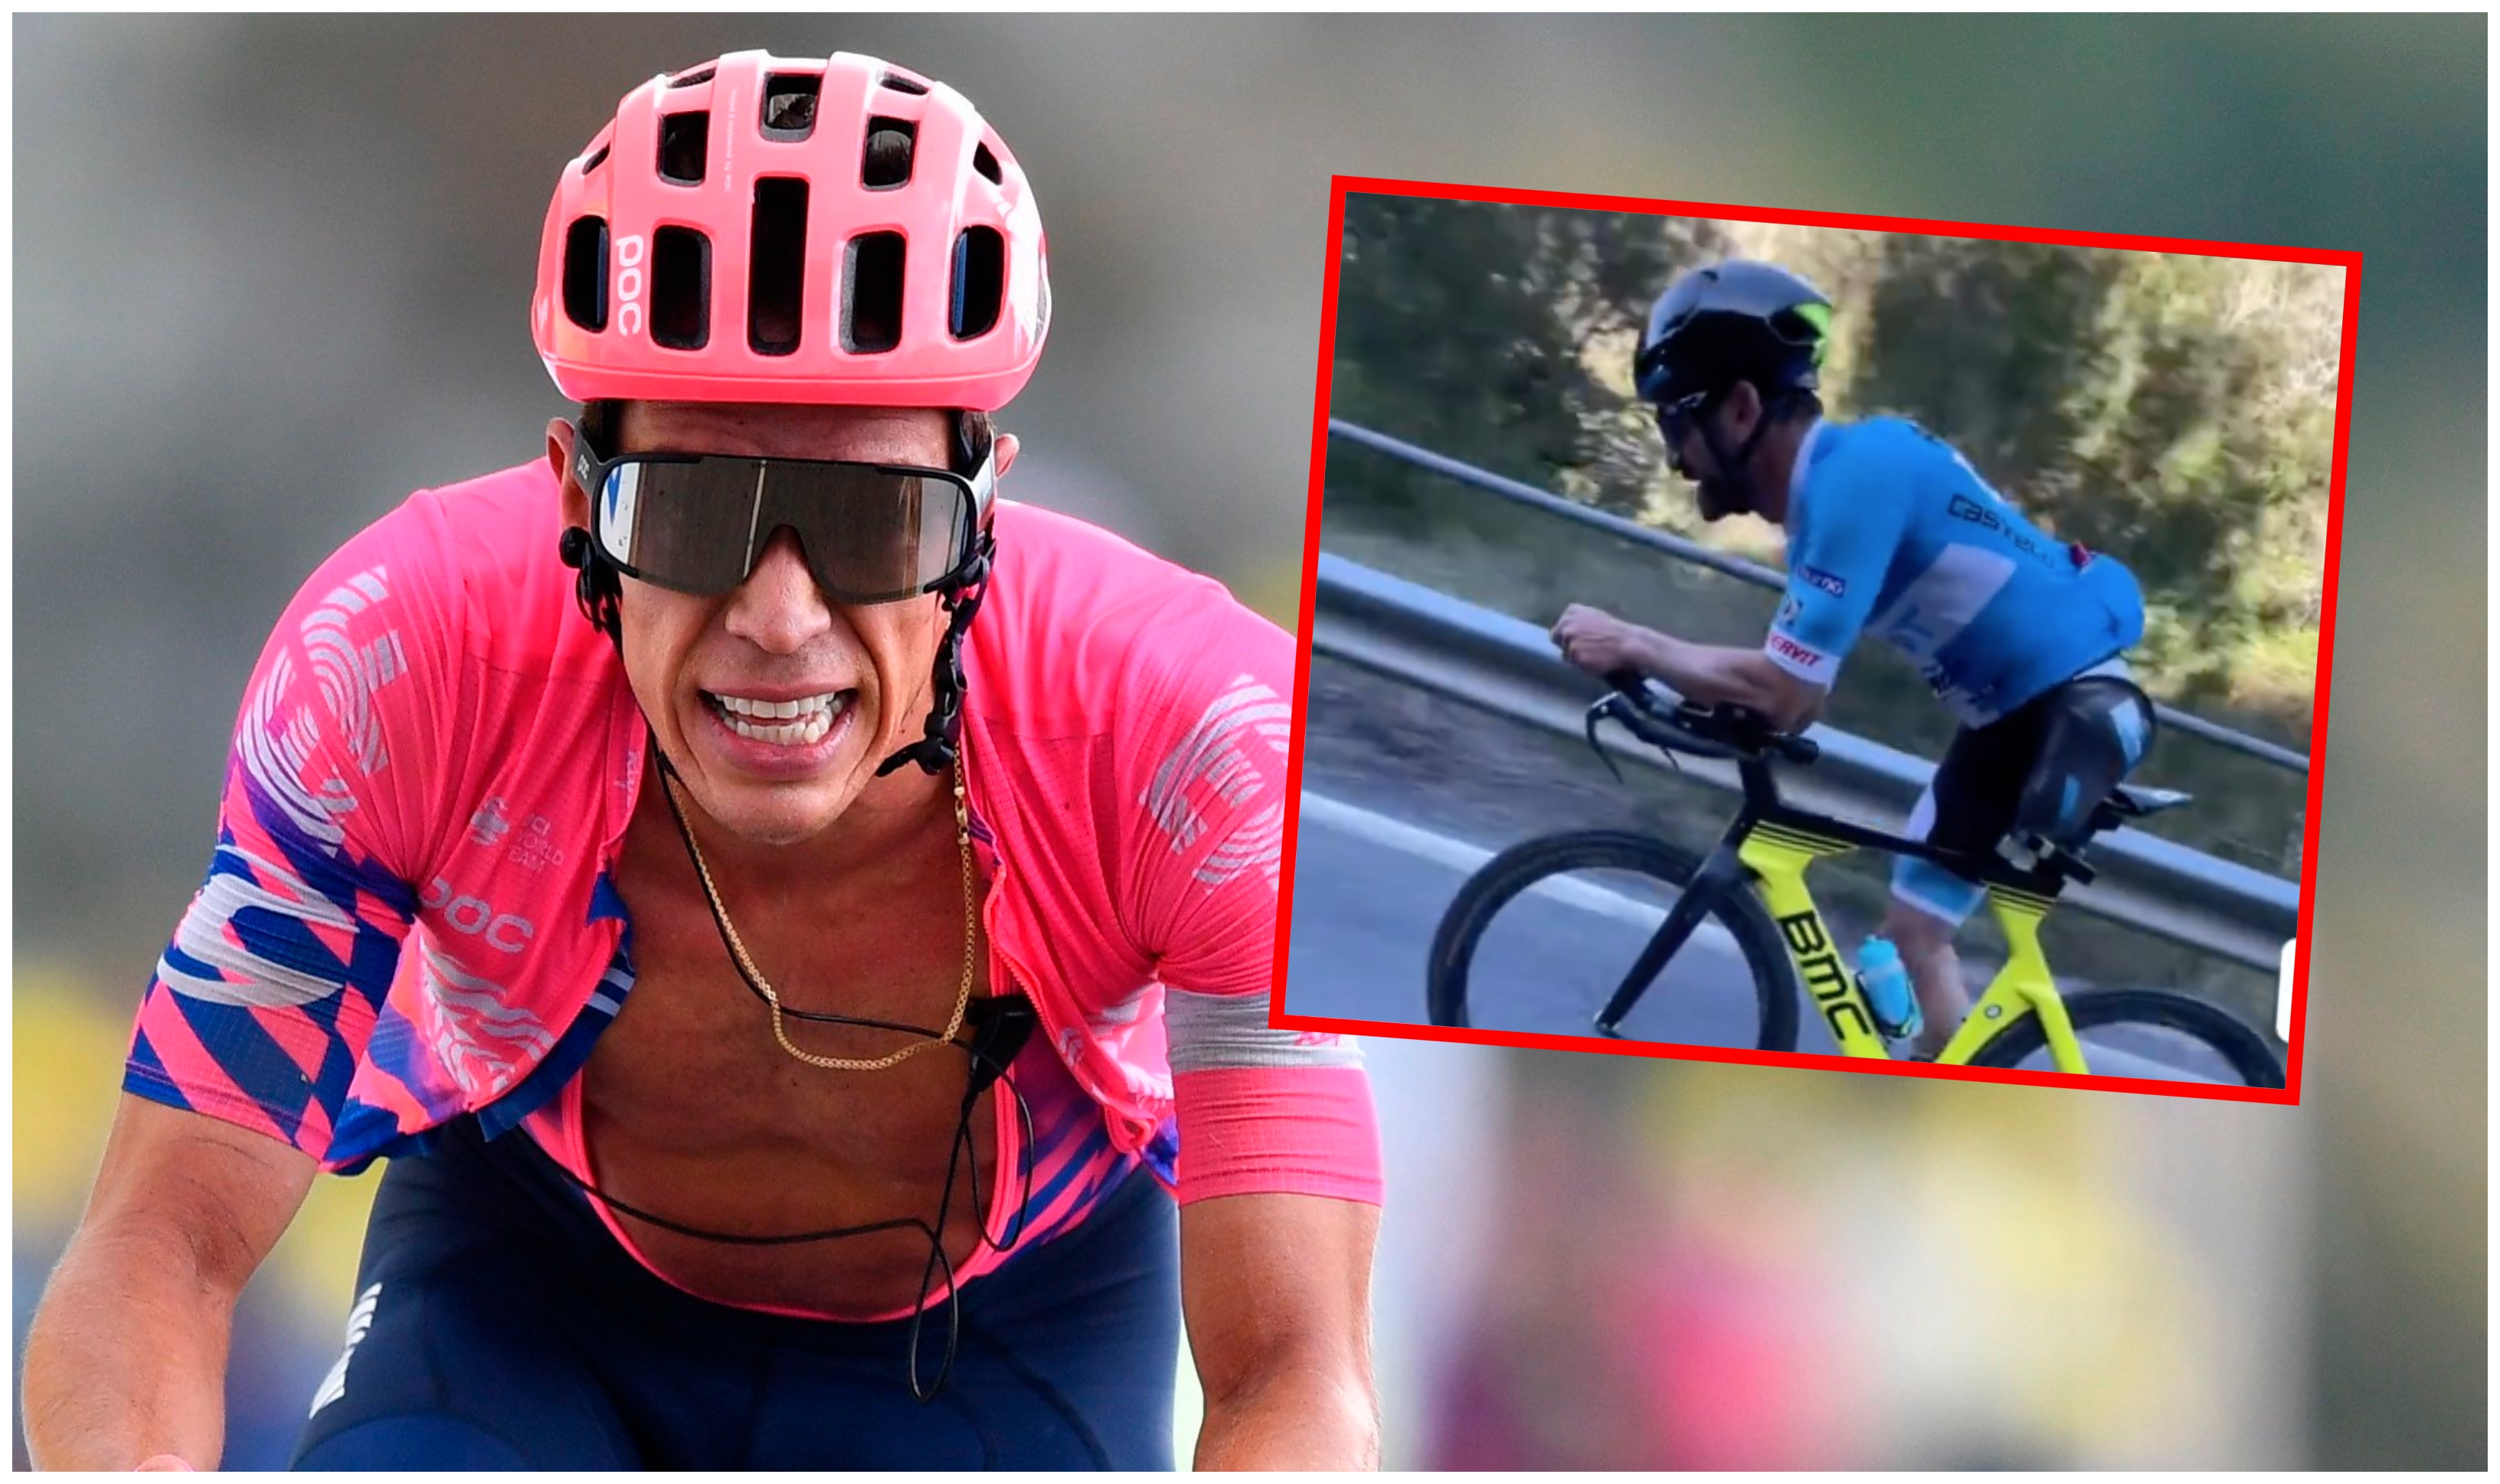 Rigoberto Urán surprised by one-legged cyclist: “These are the real example”